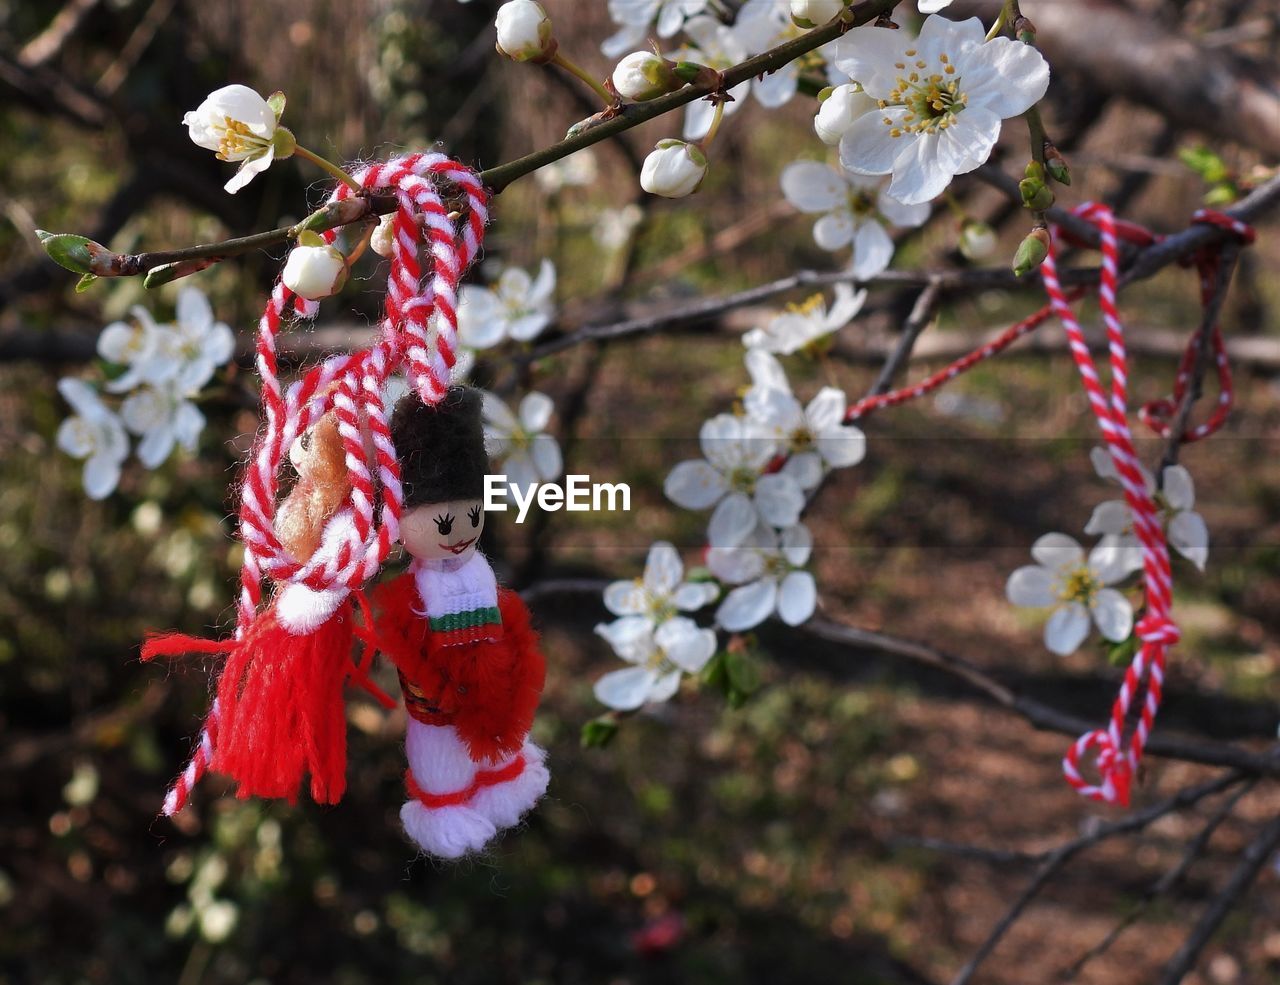 plant, flower, spring, tree, blossom, nature, branch, flowering plant, focus on foreground, beauty in nature, springtime, growth, cherry blossom, day, freshness, outdoors, fragility, hanging, no people, twig, leaf, produce, close-up, autumn, white, red, tradition, celebration